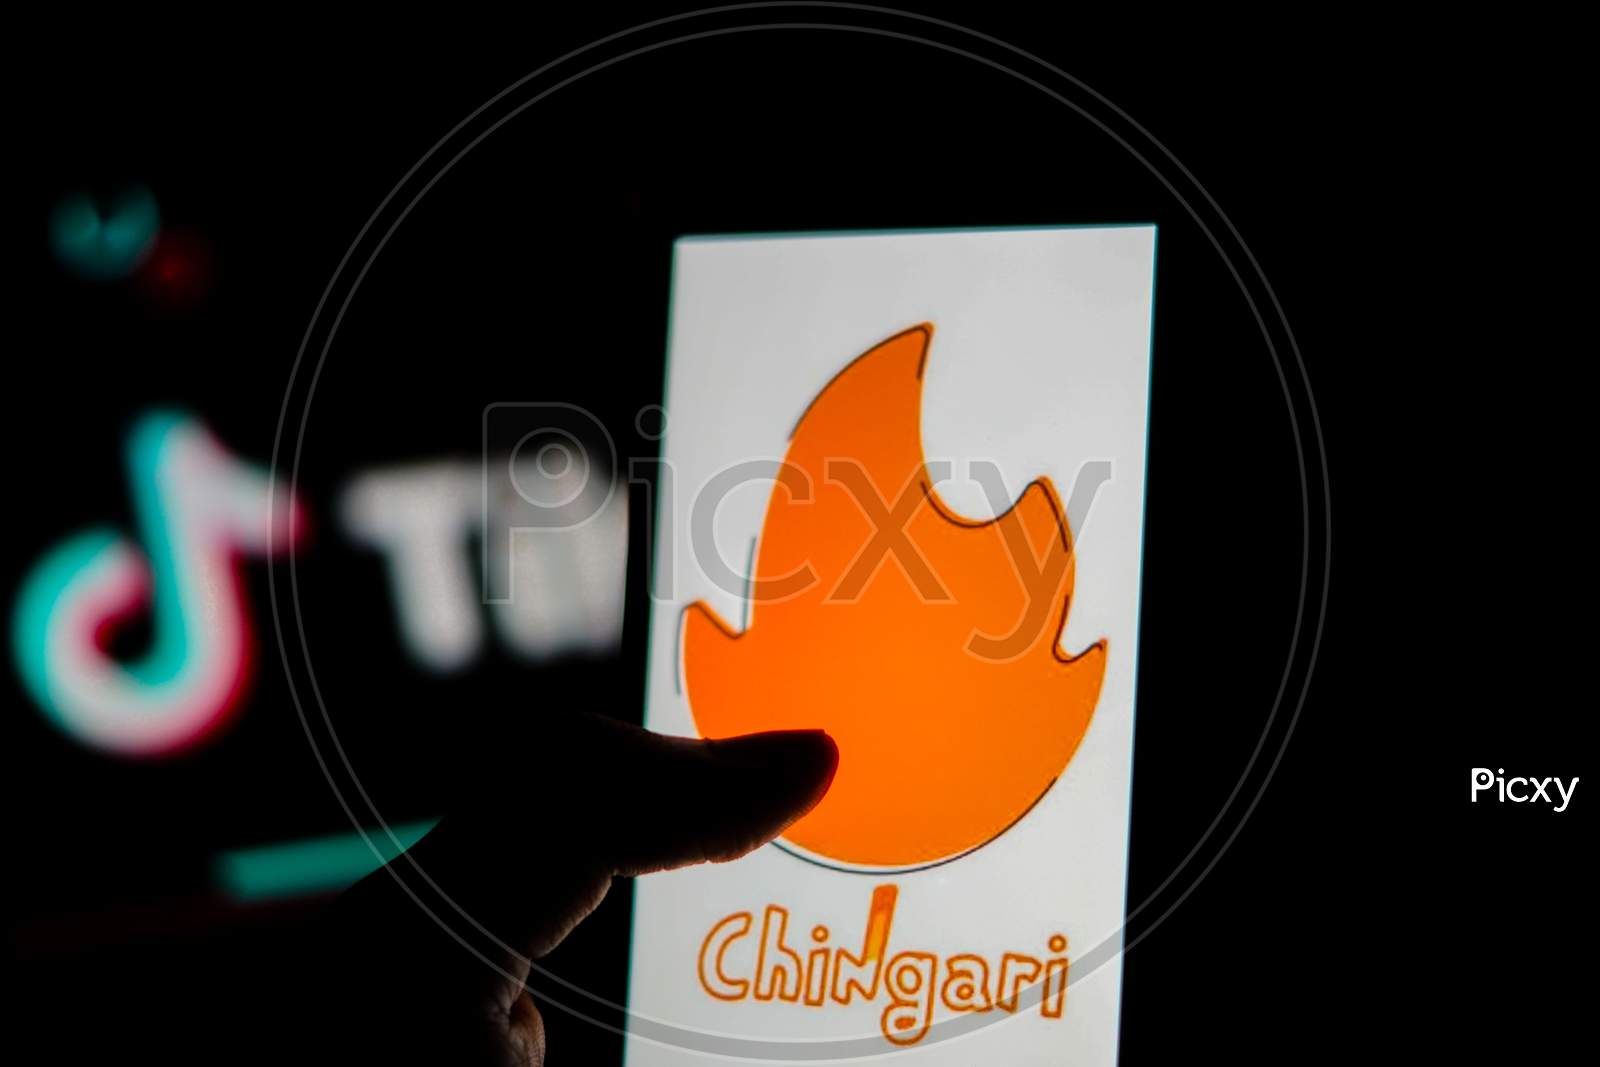 Chingari App Logo On Mobile Screen With Banned Tiktok Application Logo In The Background And A Finger About To Touch